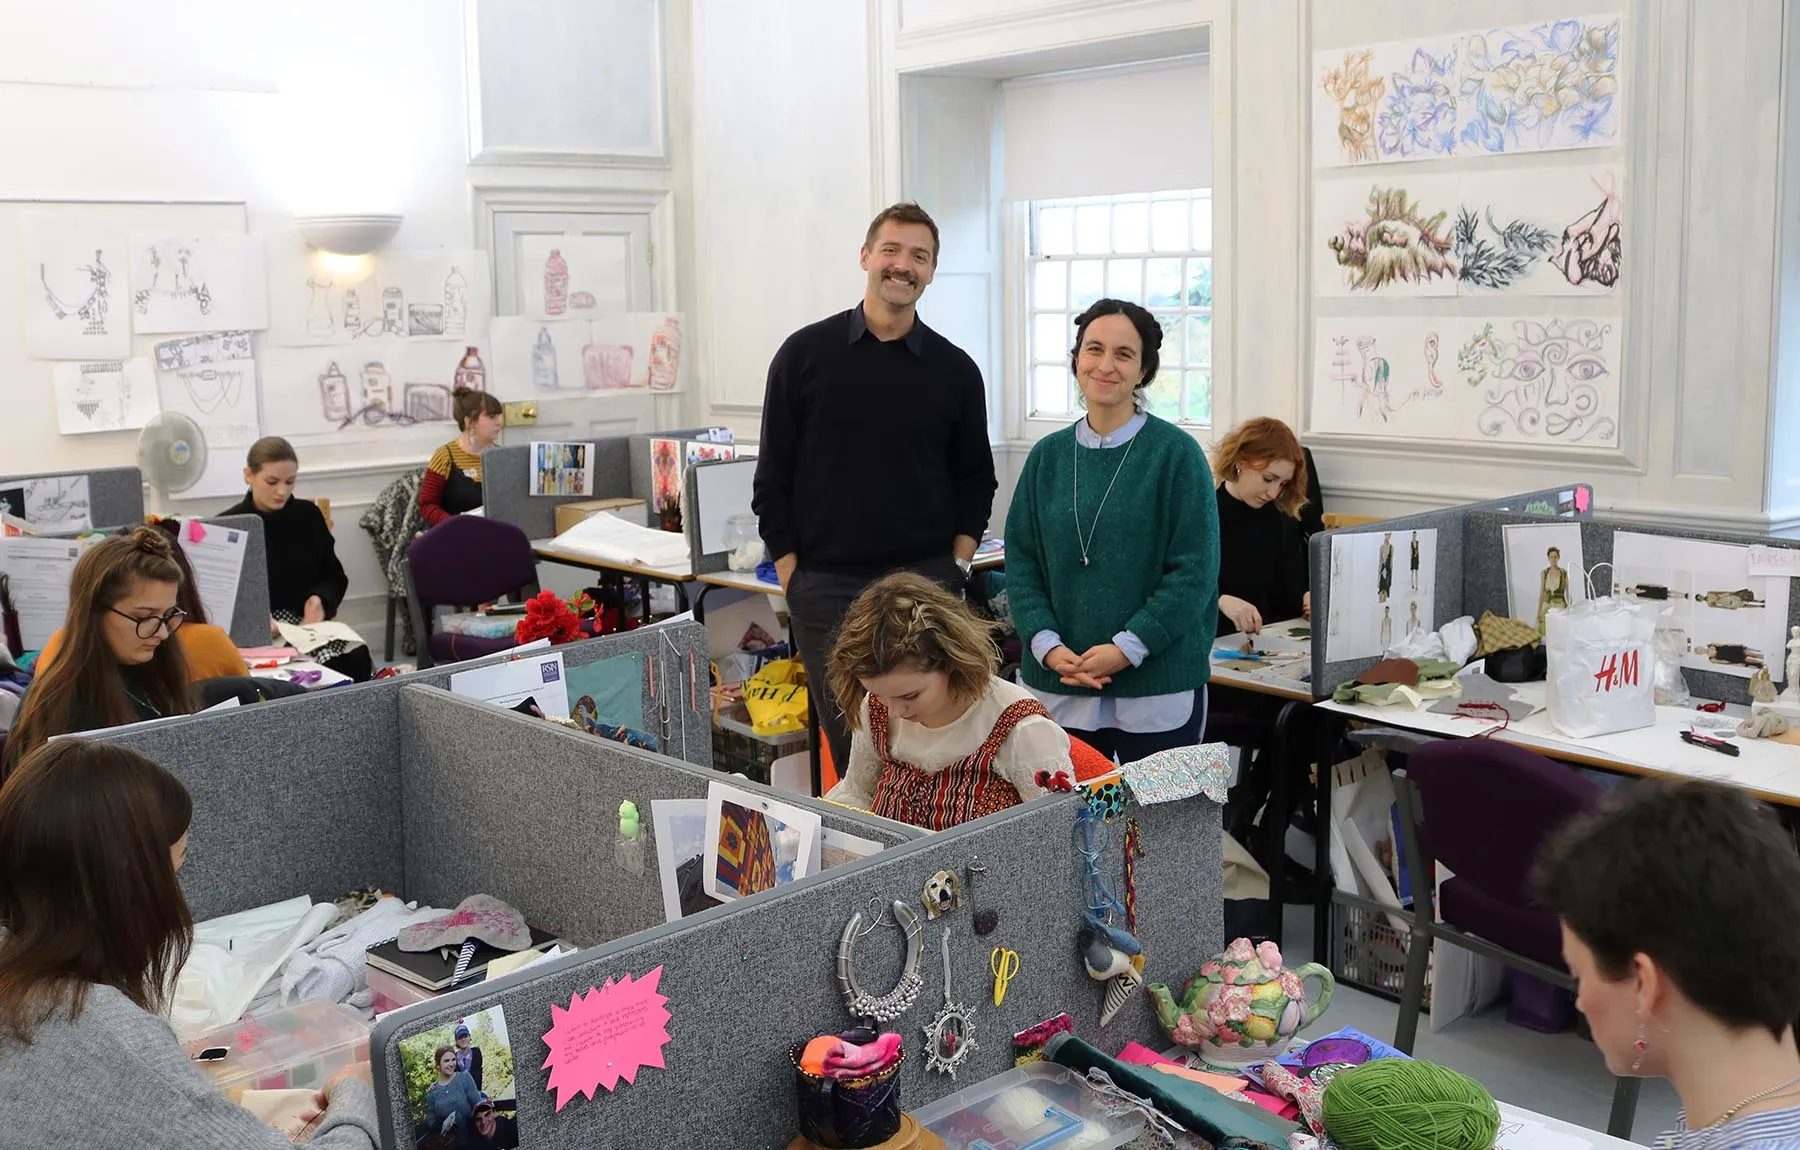 Patrick Grant with visiting lecturer and textile artist Celia Pym Degree students at the Royal School of Needlework